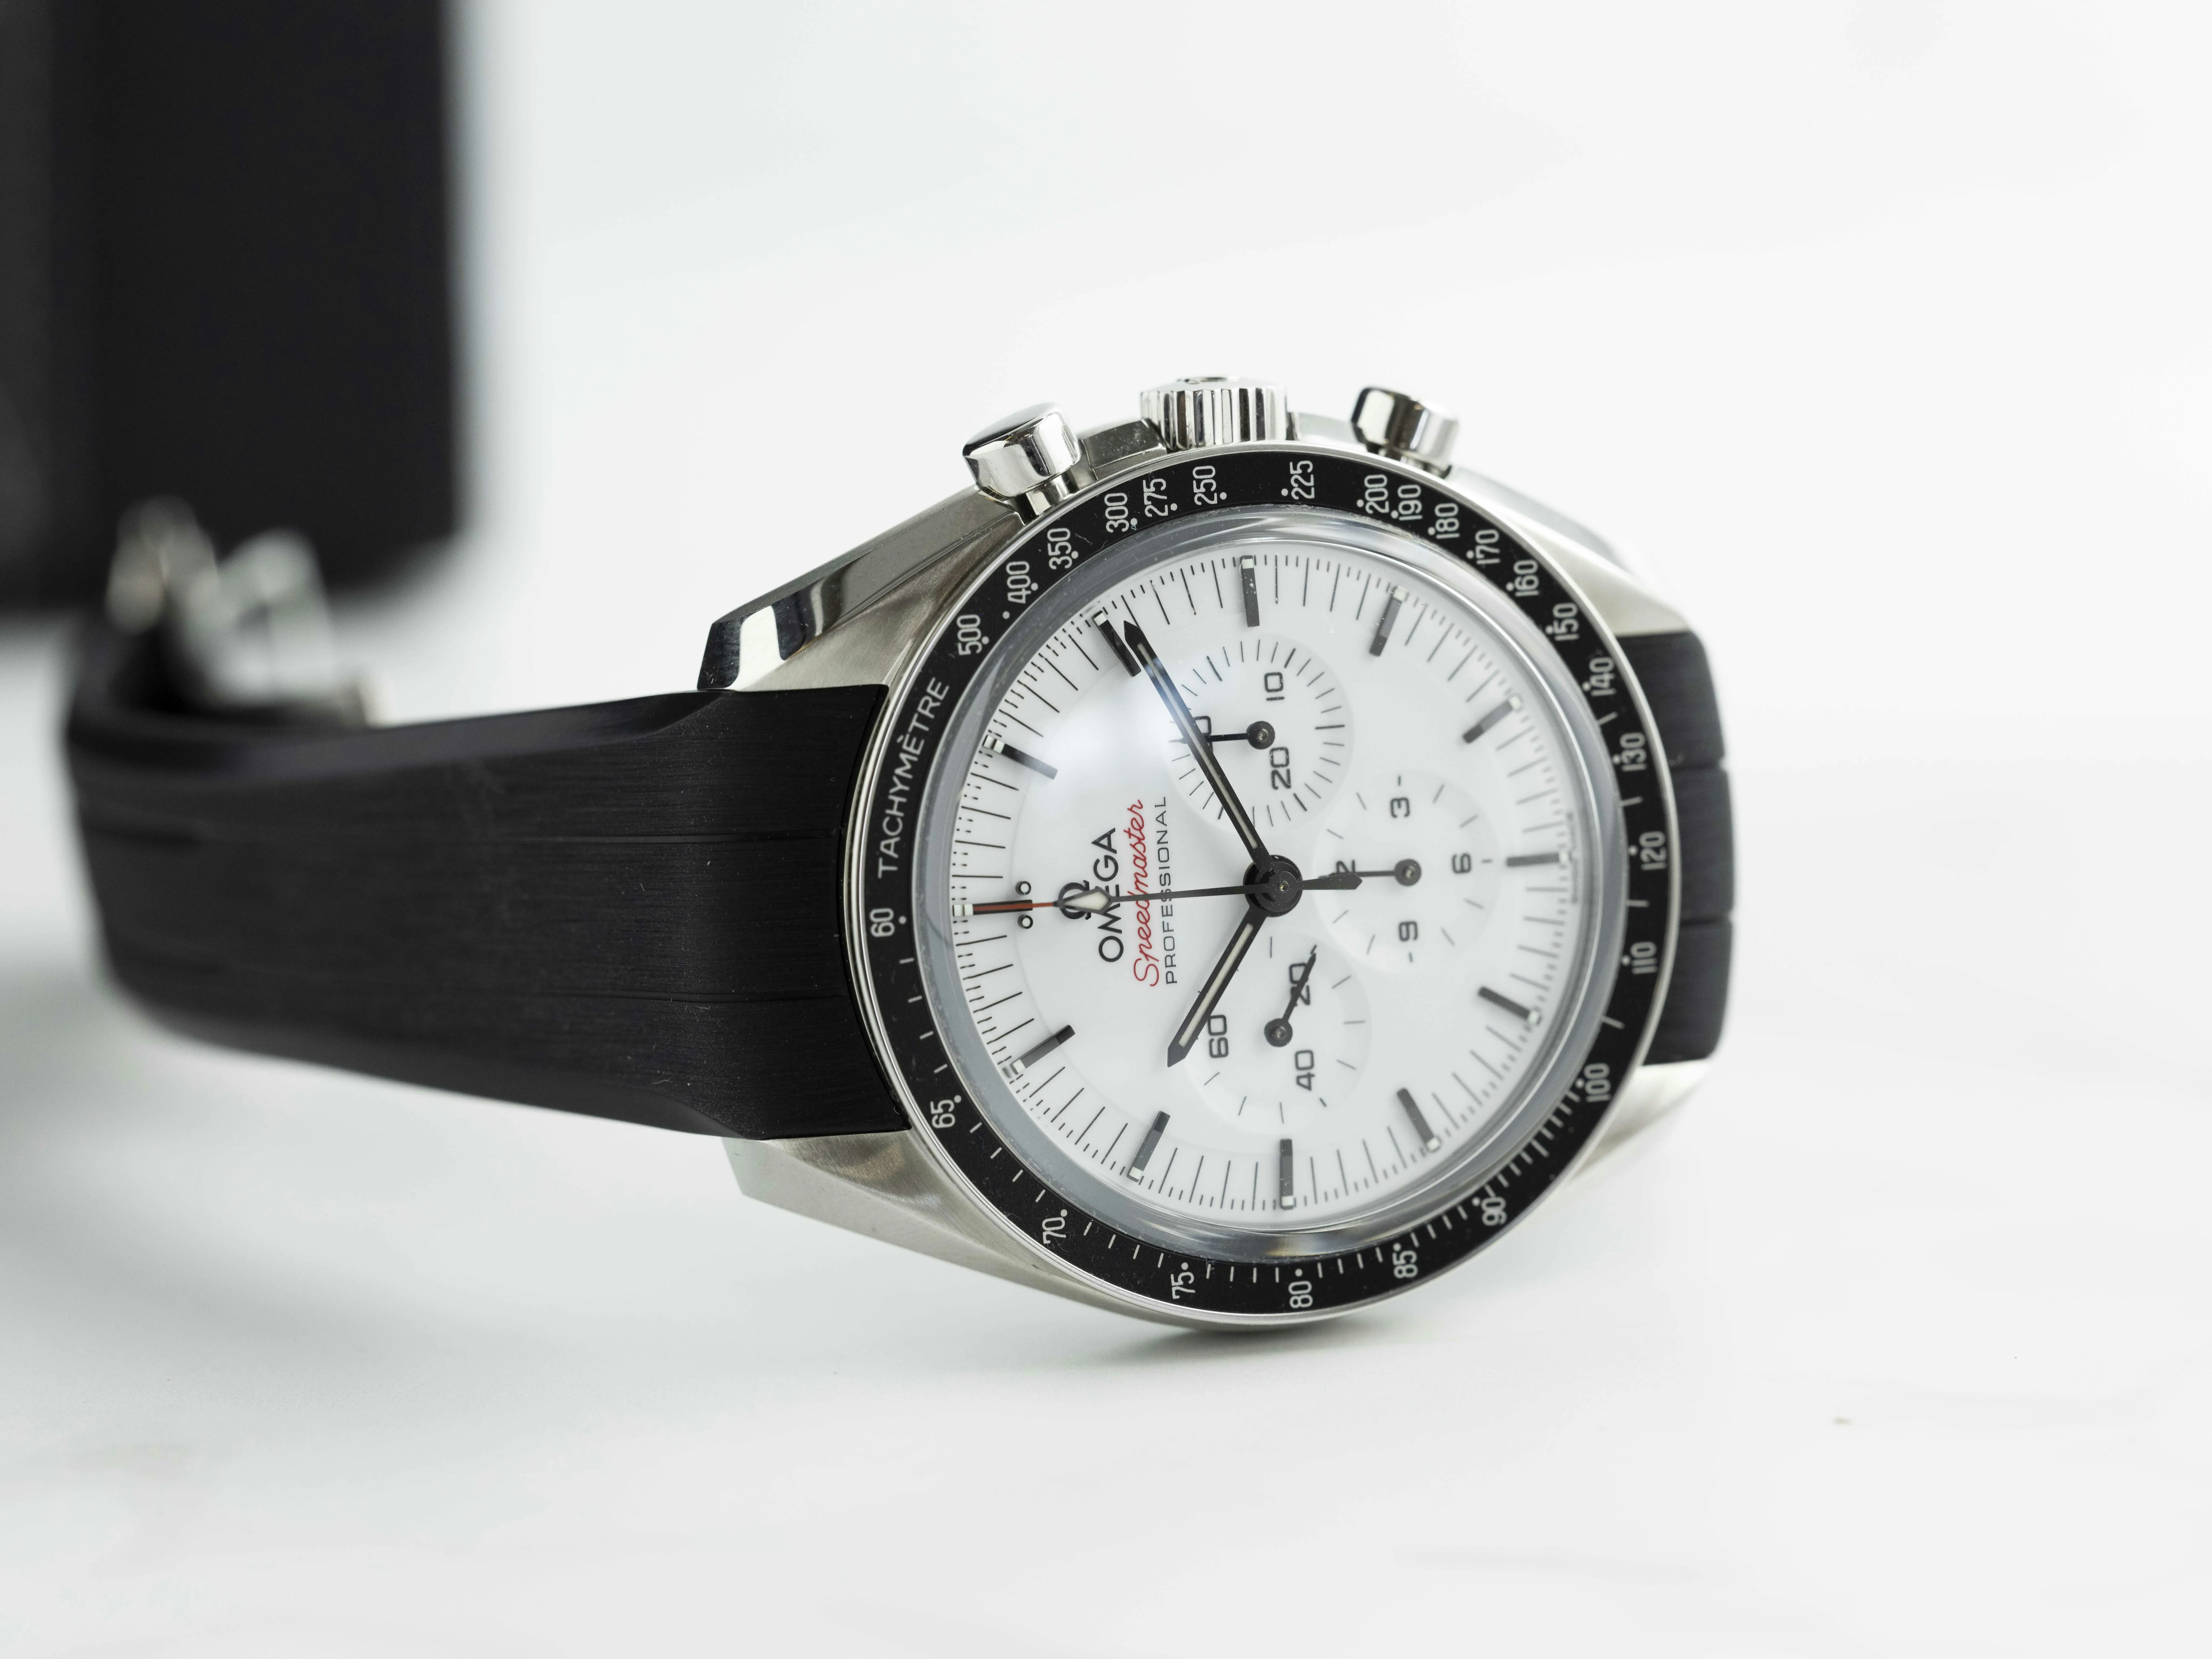 Omega Speedmaster Professional Moonwatch 310.32.42.50.04.001 42mm Stainless steel White 2